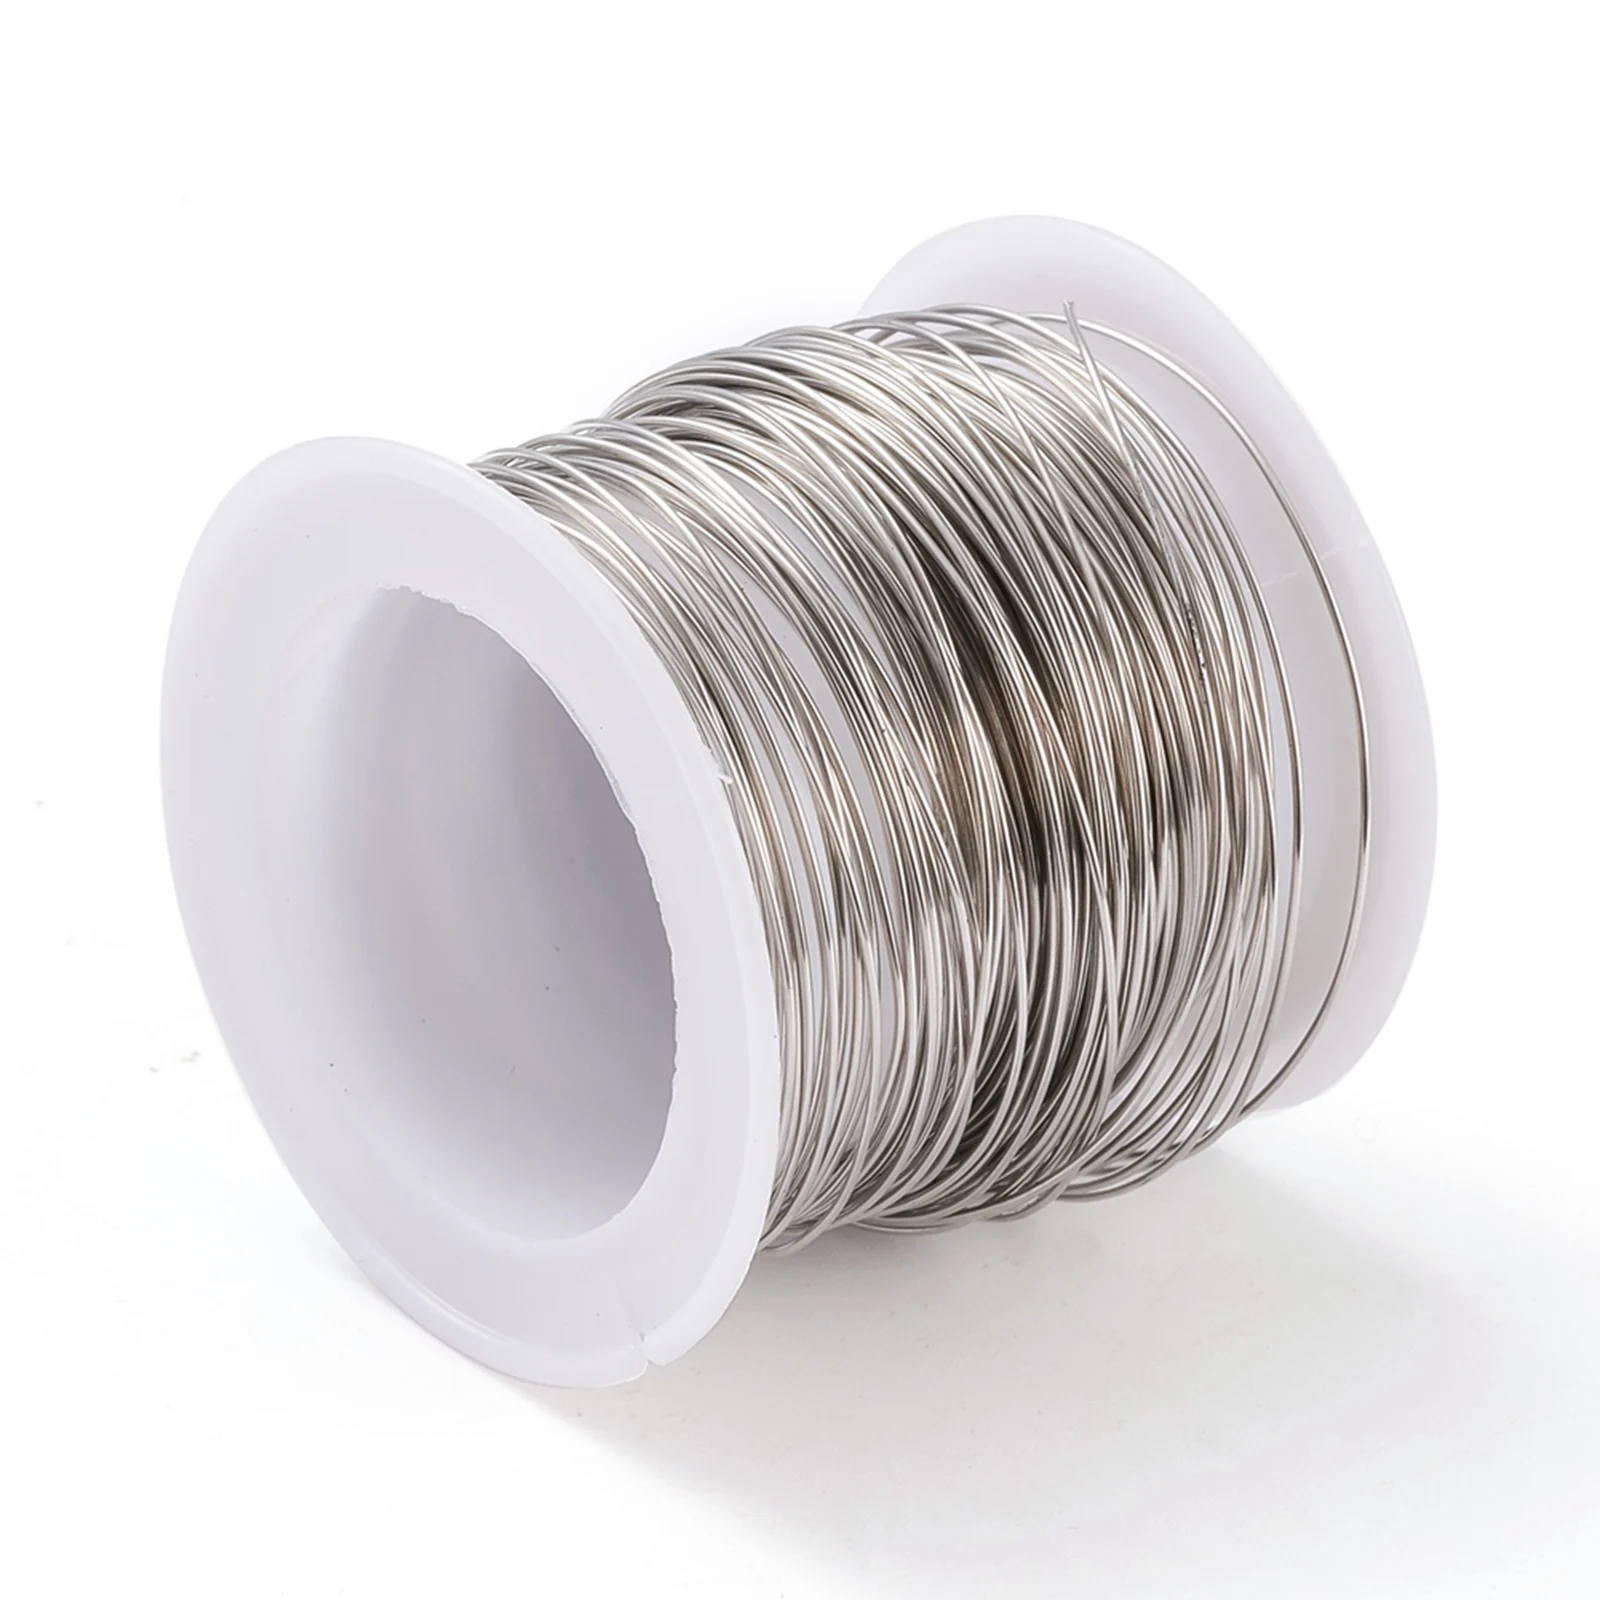 20,22,24,28 Gauge 304 Stainless Steel Wire Craft Bailing Wire Sculpting Wire  For Jewelry Making